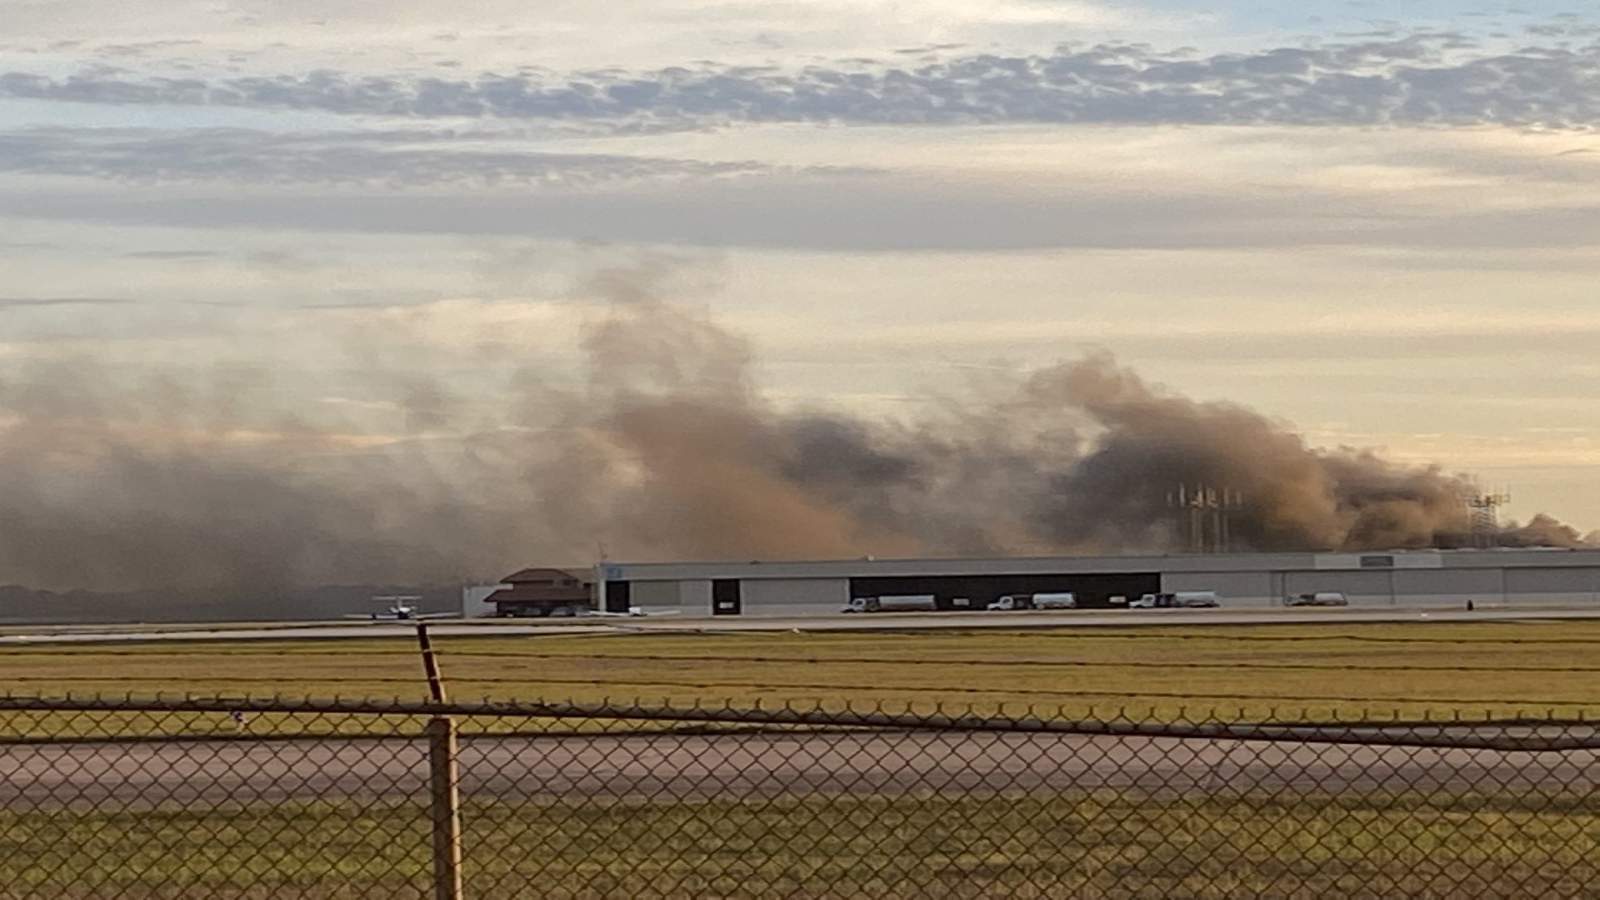 Crews respond to hangar fire at Hobby Airport, officials say